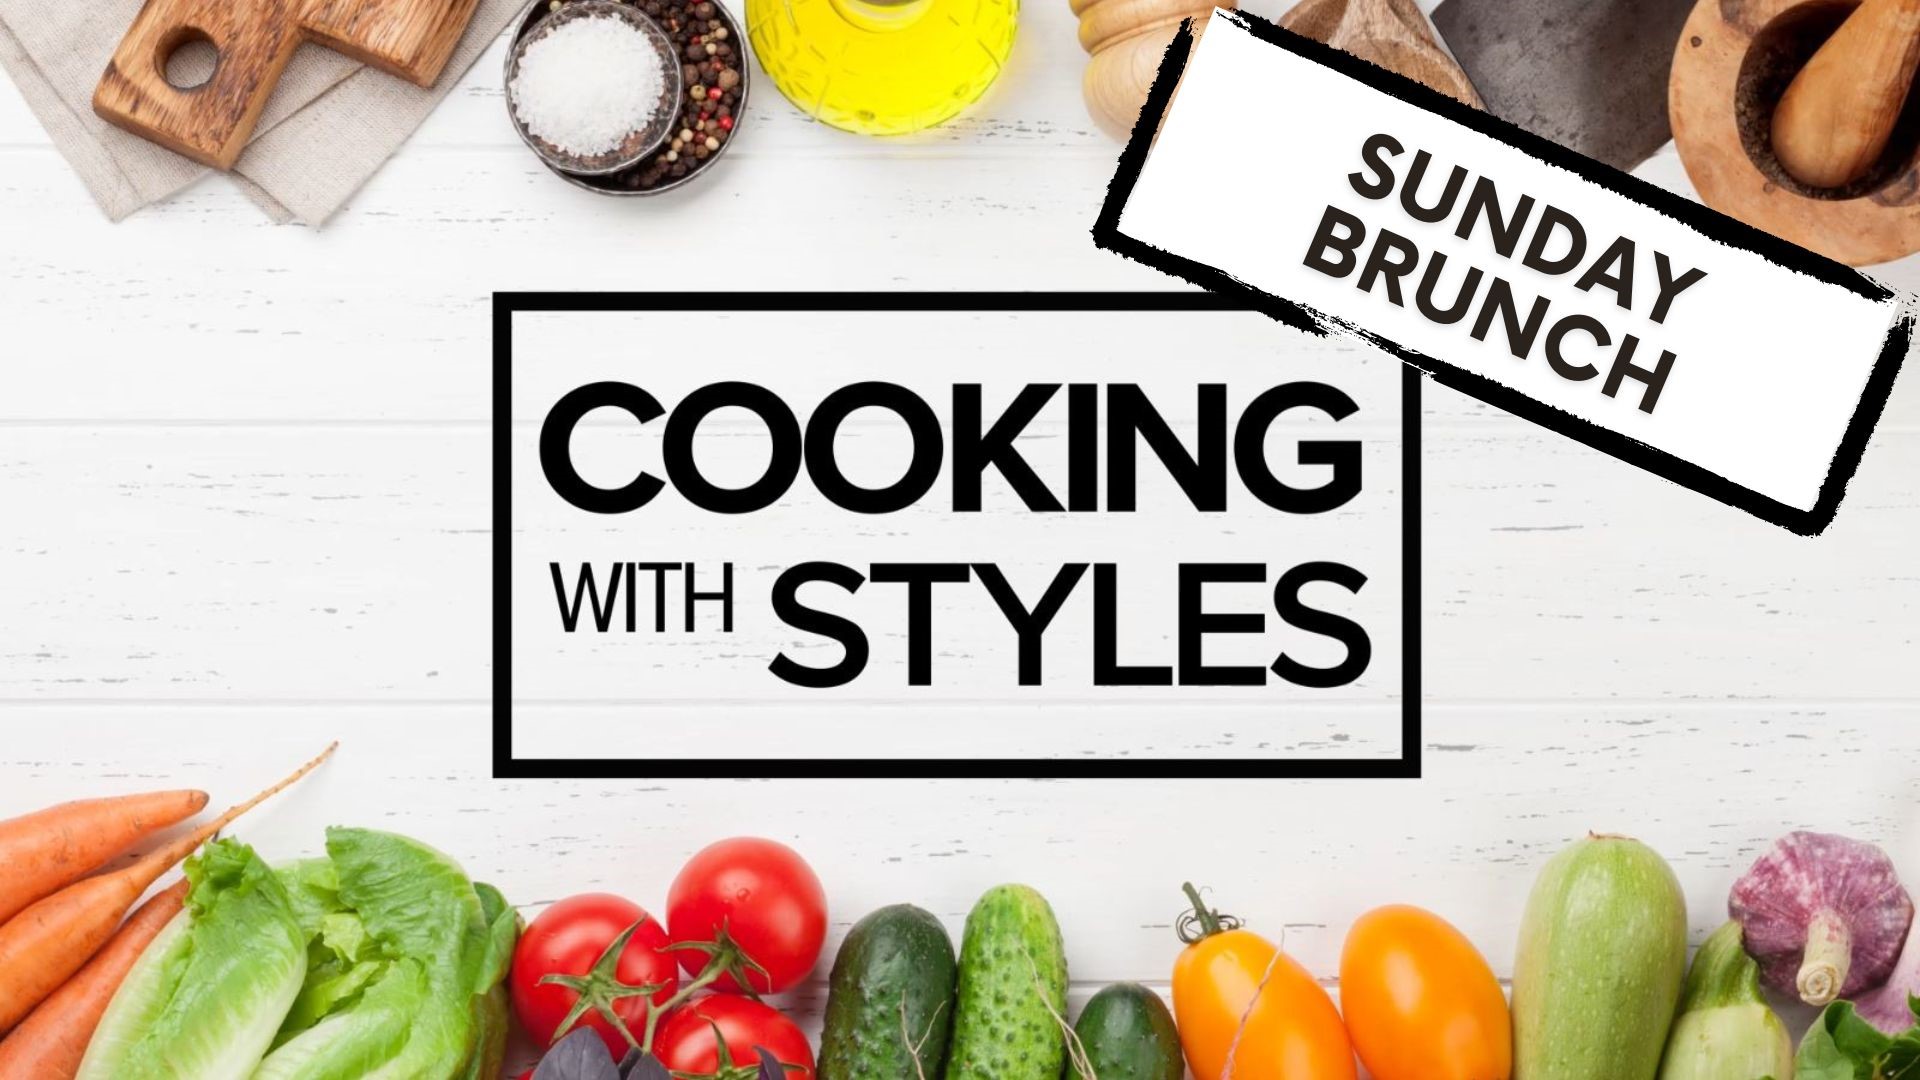 Shawn Styles shares recipes for your Sunday brunch, from frittatas to crepes. Whether it's a holiday or just for fun, these recipes will please any crowd.